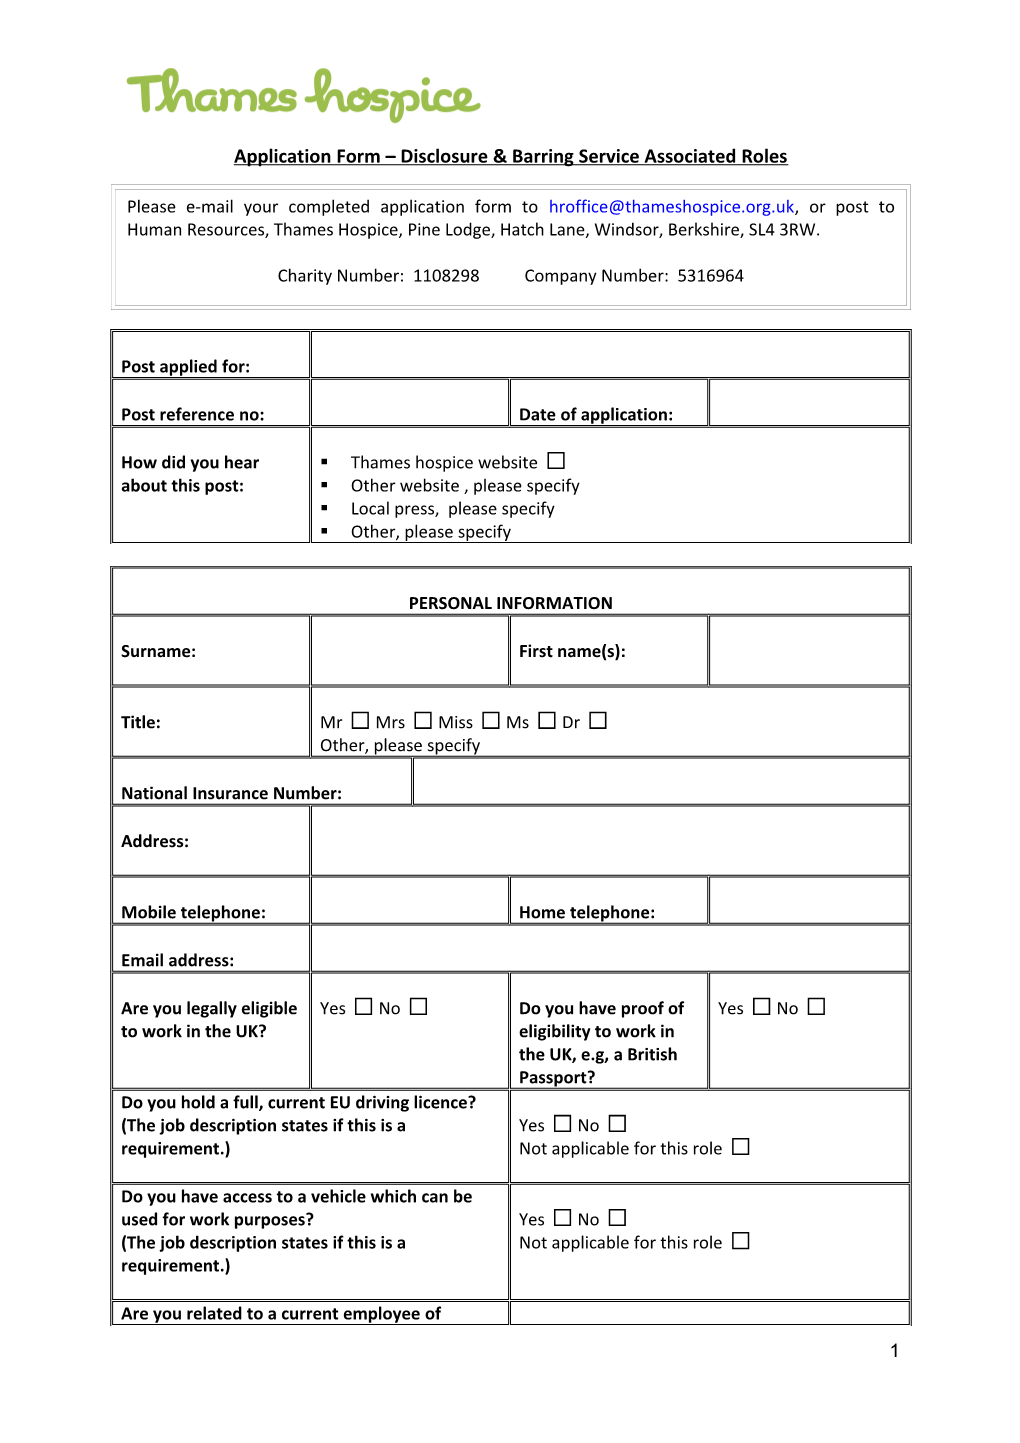 Application Form Disclosure & Barring Service Associated Roles